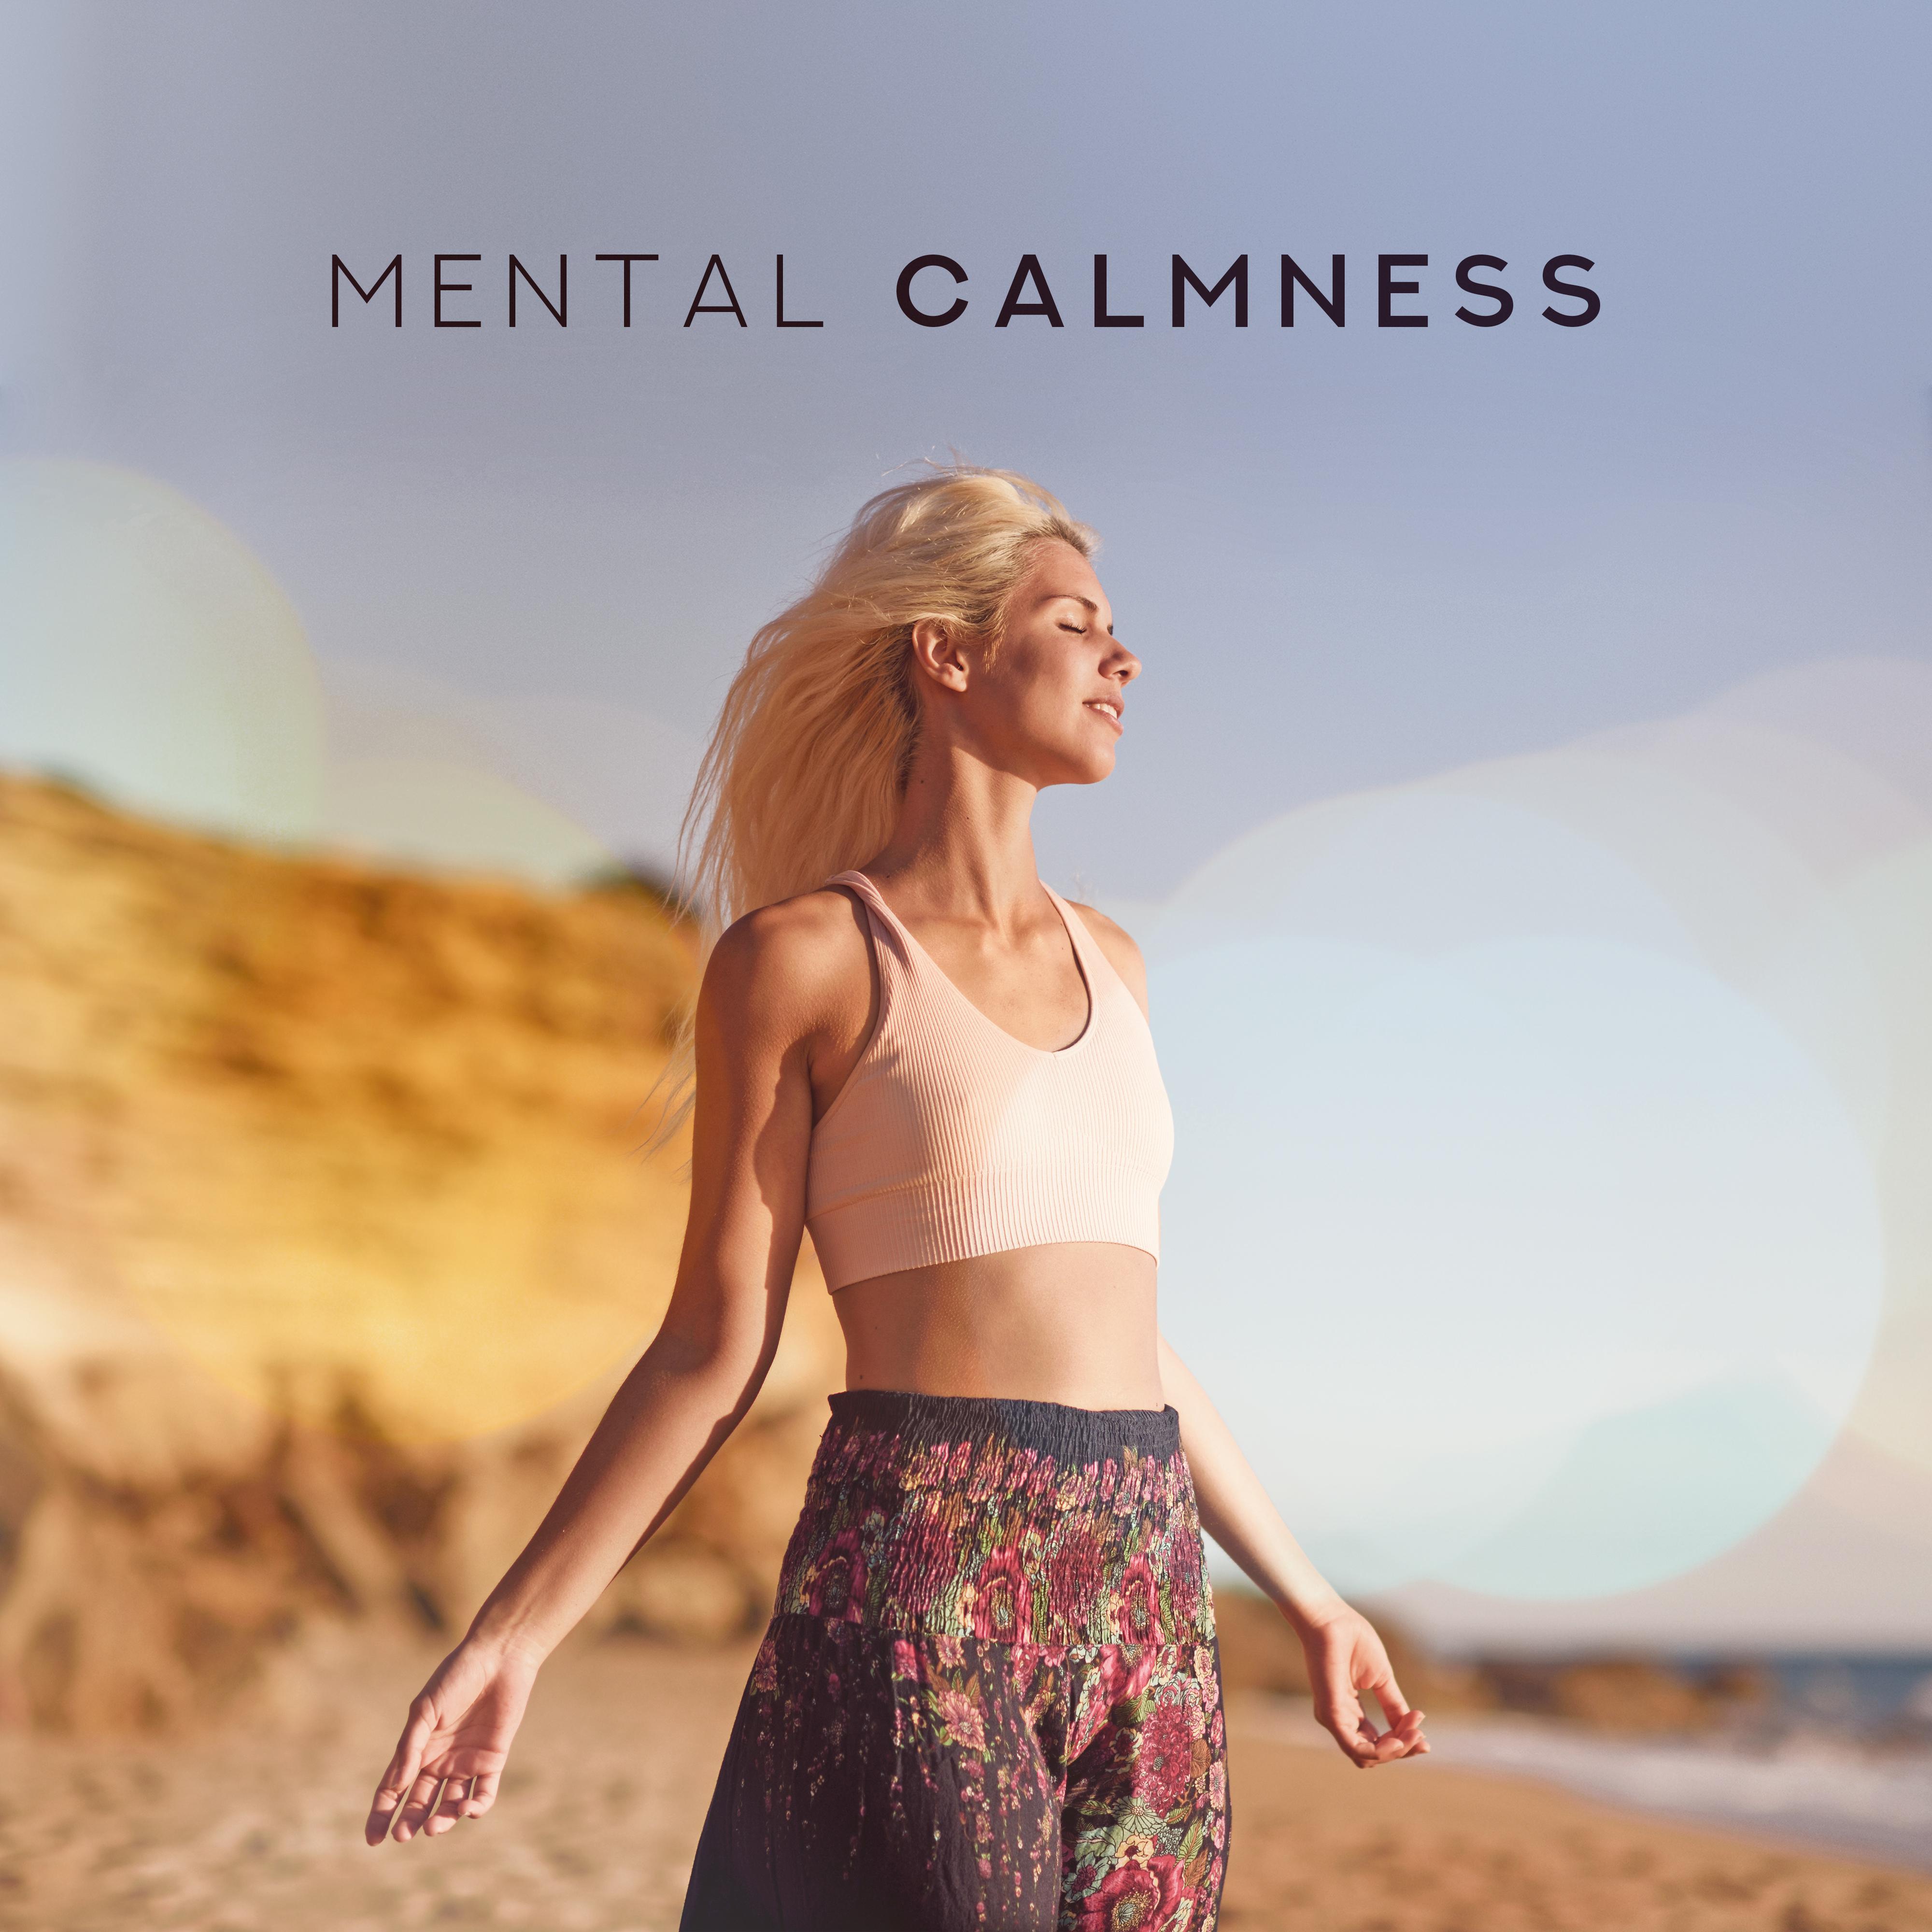 Mental Calmness - Deeply Relaxing Meditation Music dedicated to Relaxation, Rest, Sleep, Meditation or Yoga Exercises